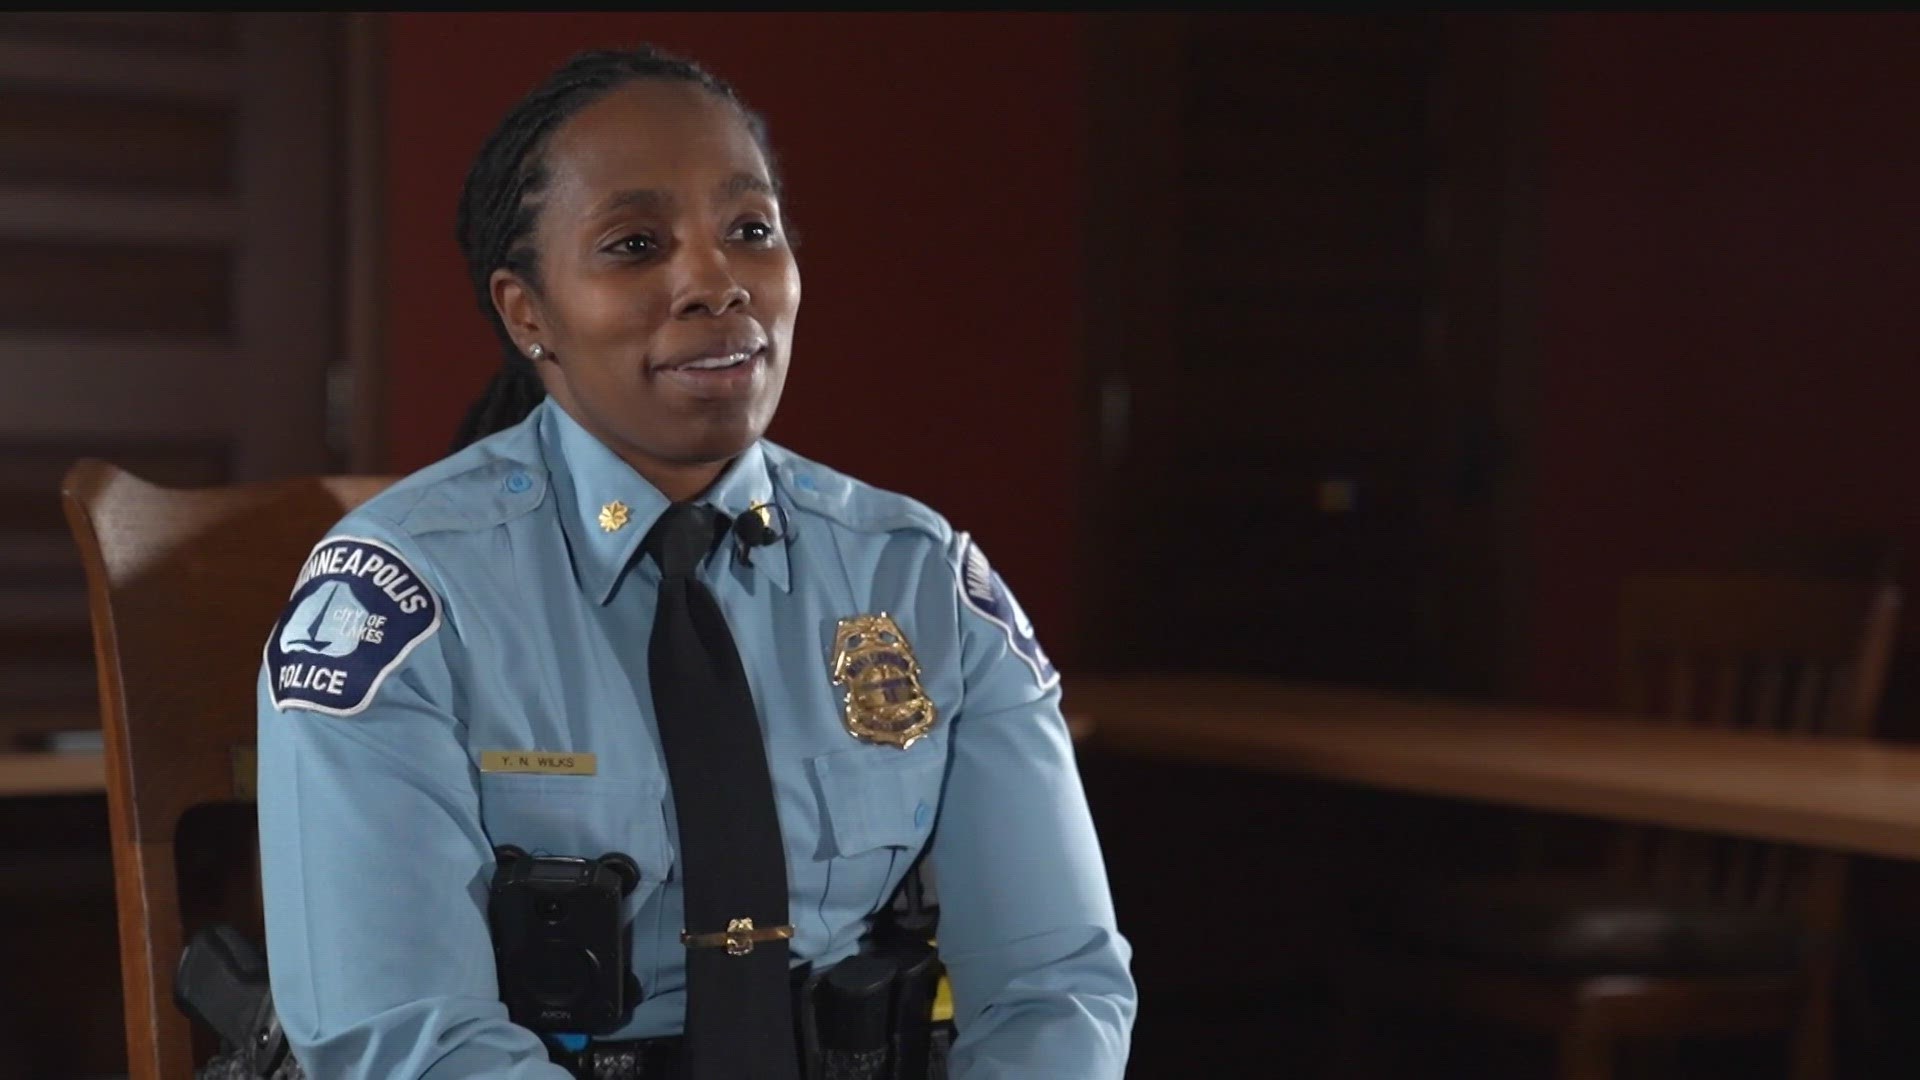 Commander Yolanda Wilks is the head of MPD's new Implementation Unit, which will carry out changes mandated by state and federal court orders.